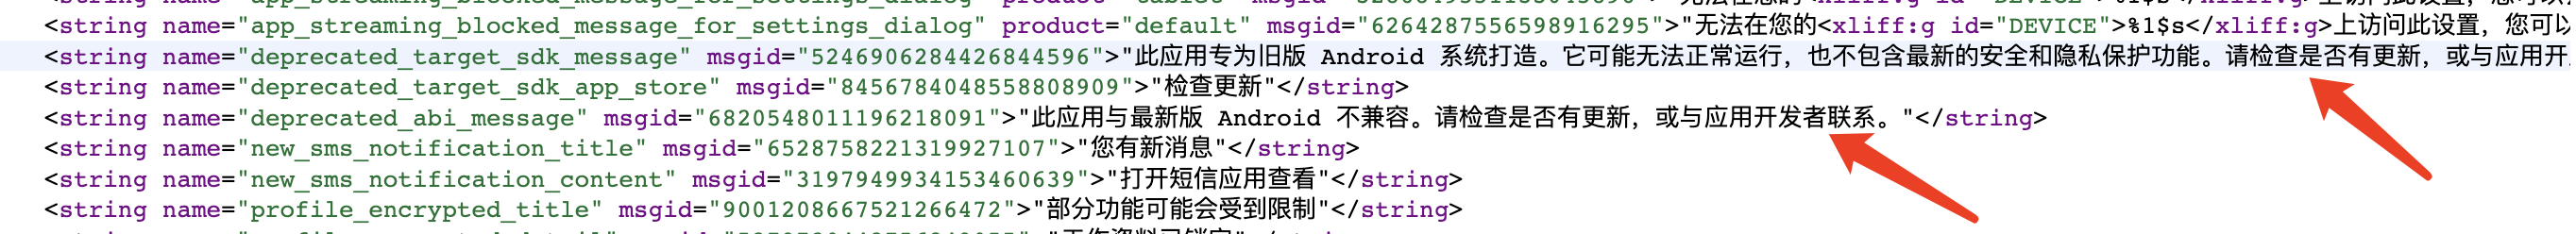 Android14弹窗问题